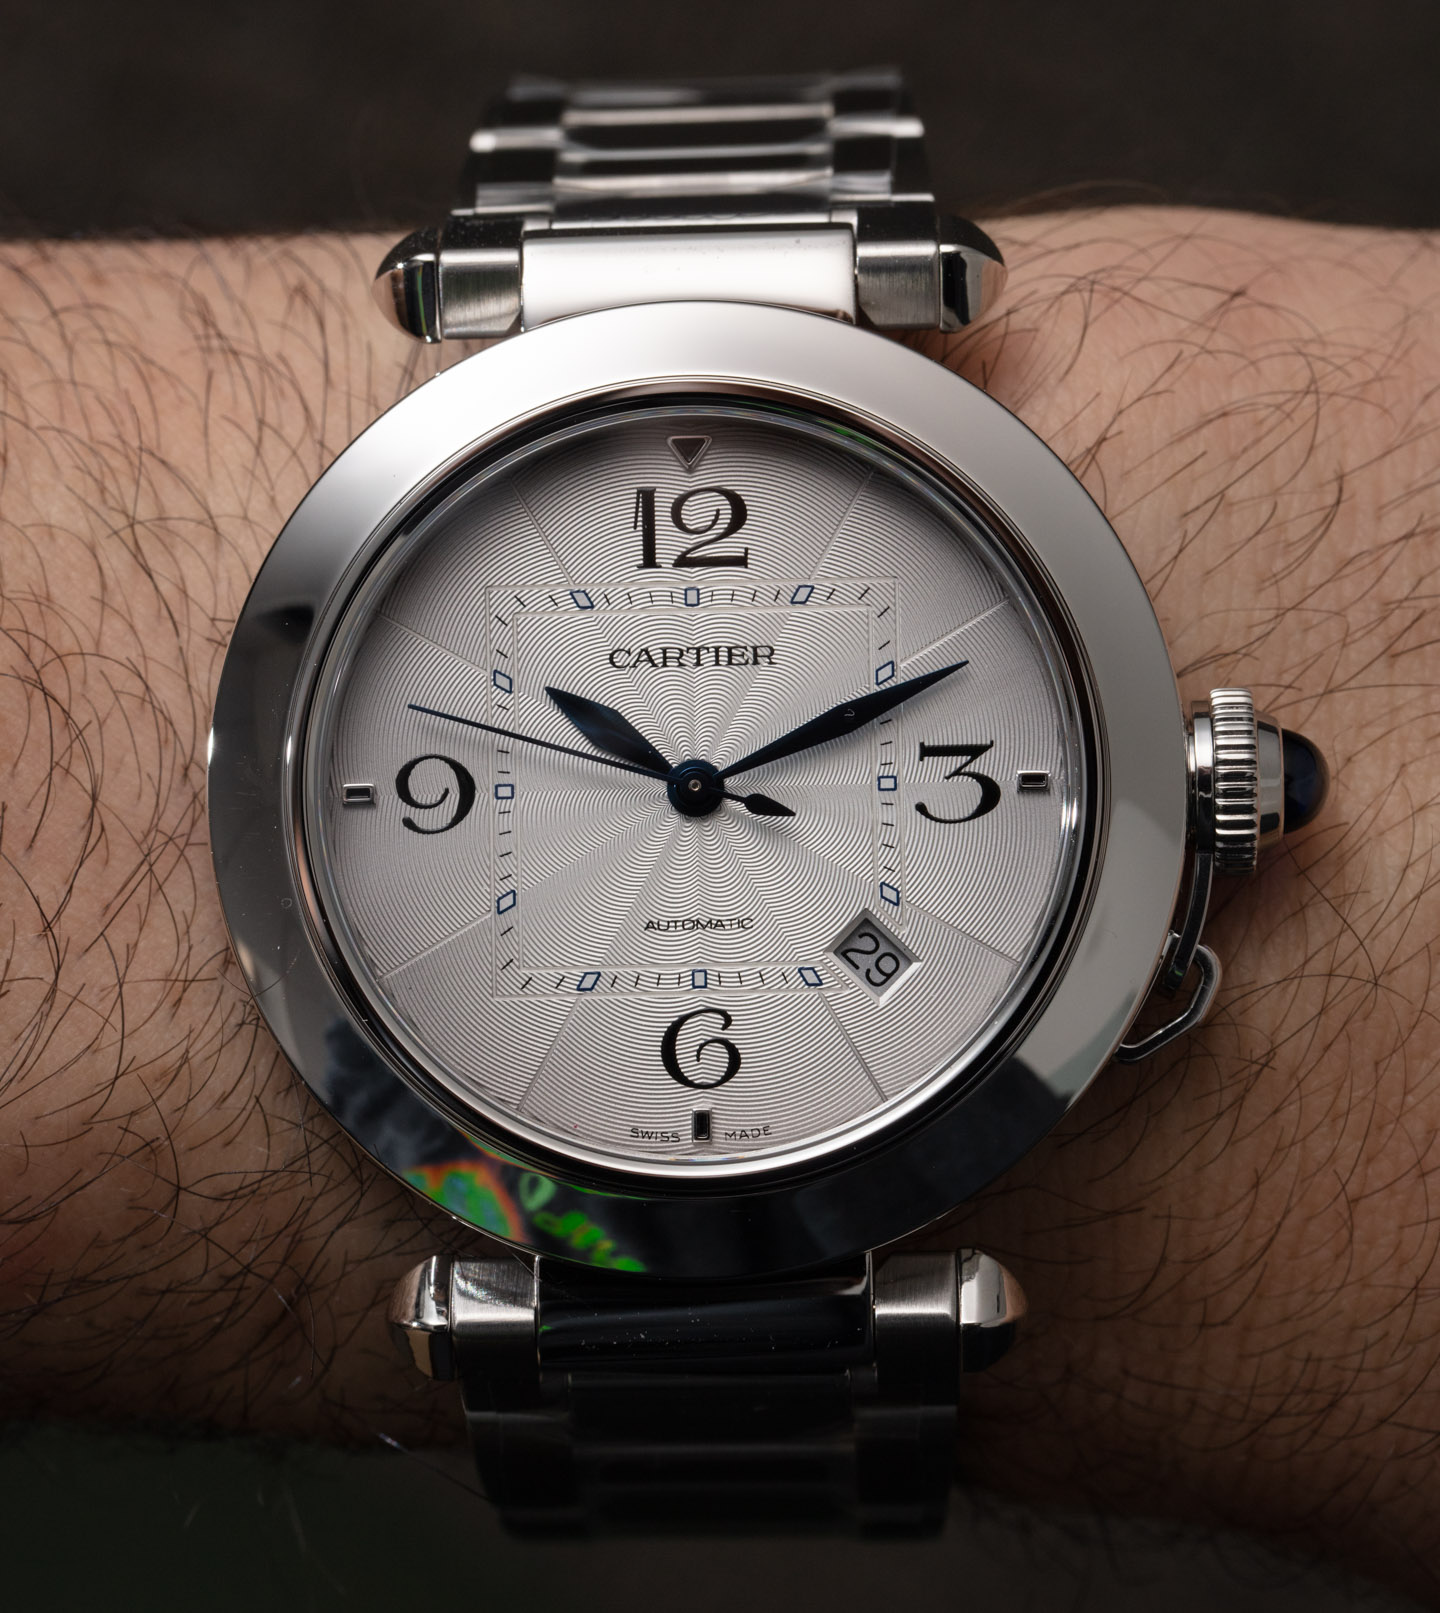 Hands-On: Cartier Pasha 41mm Automatic 